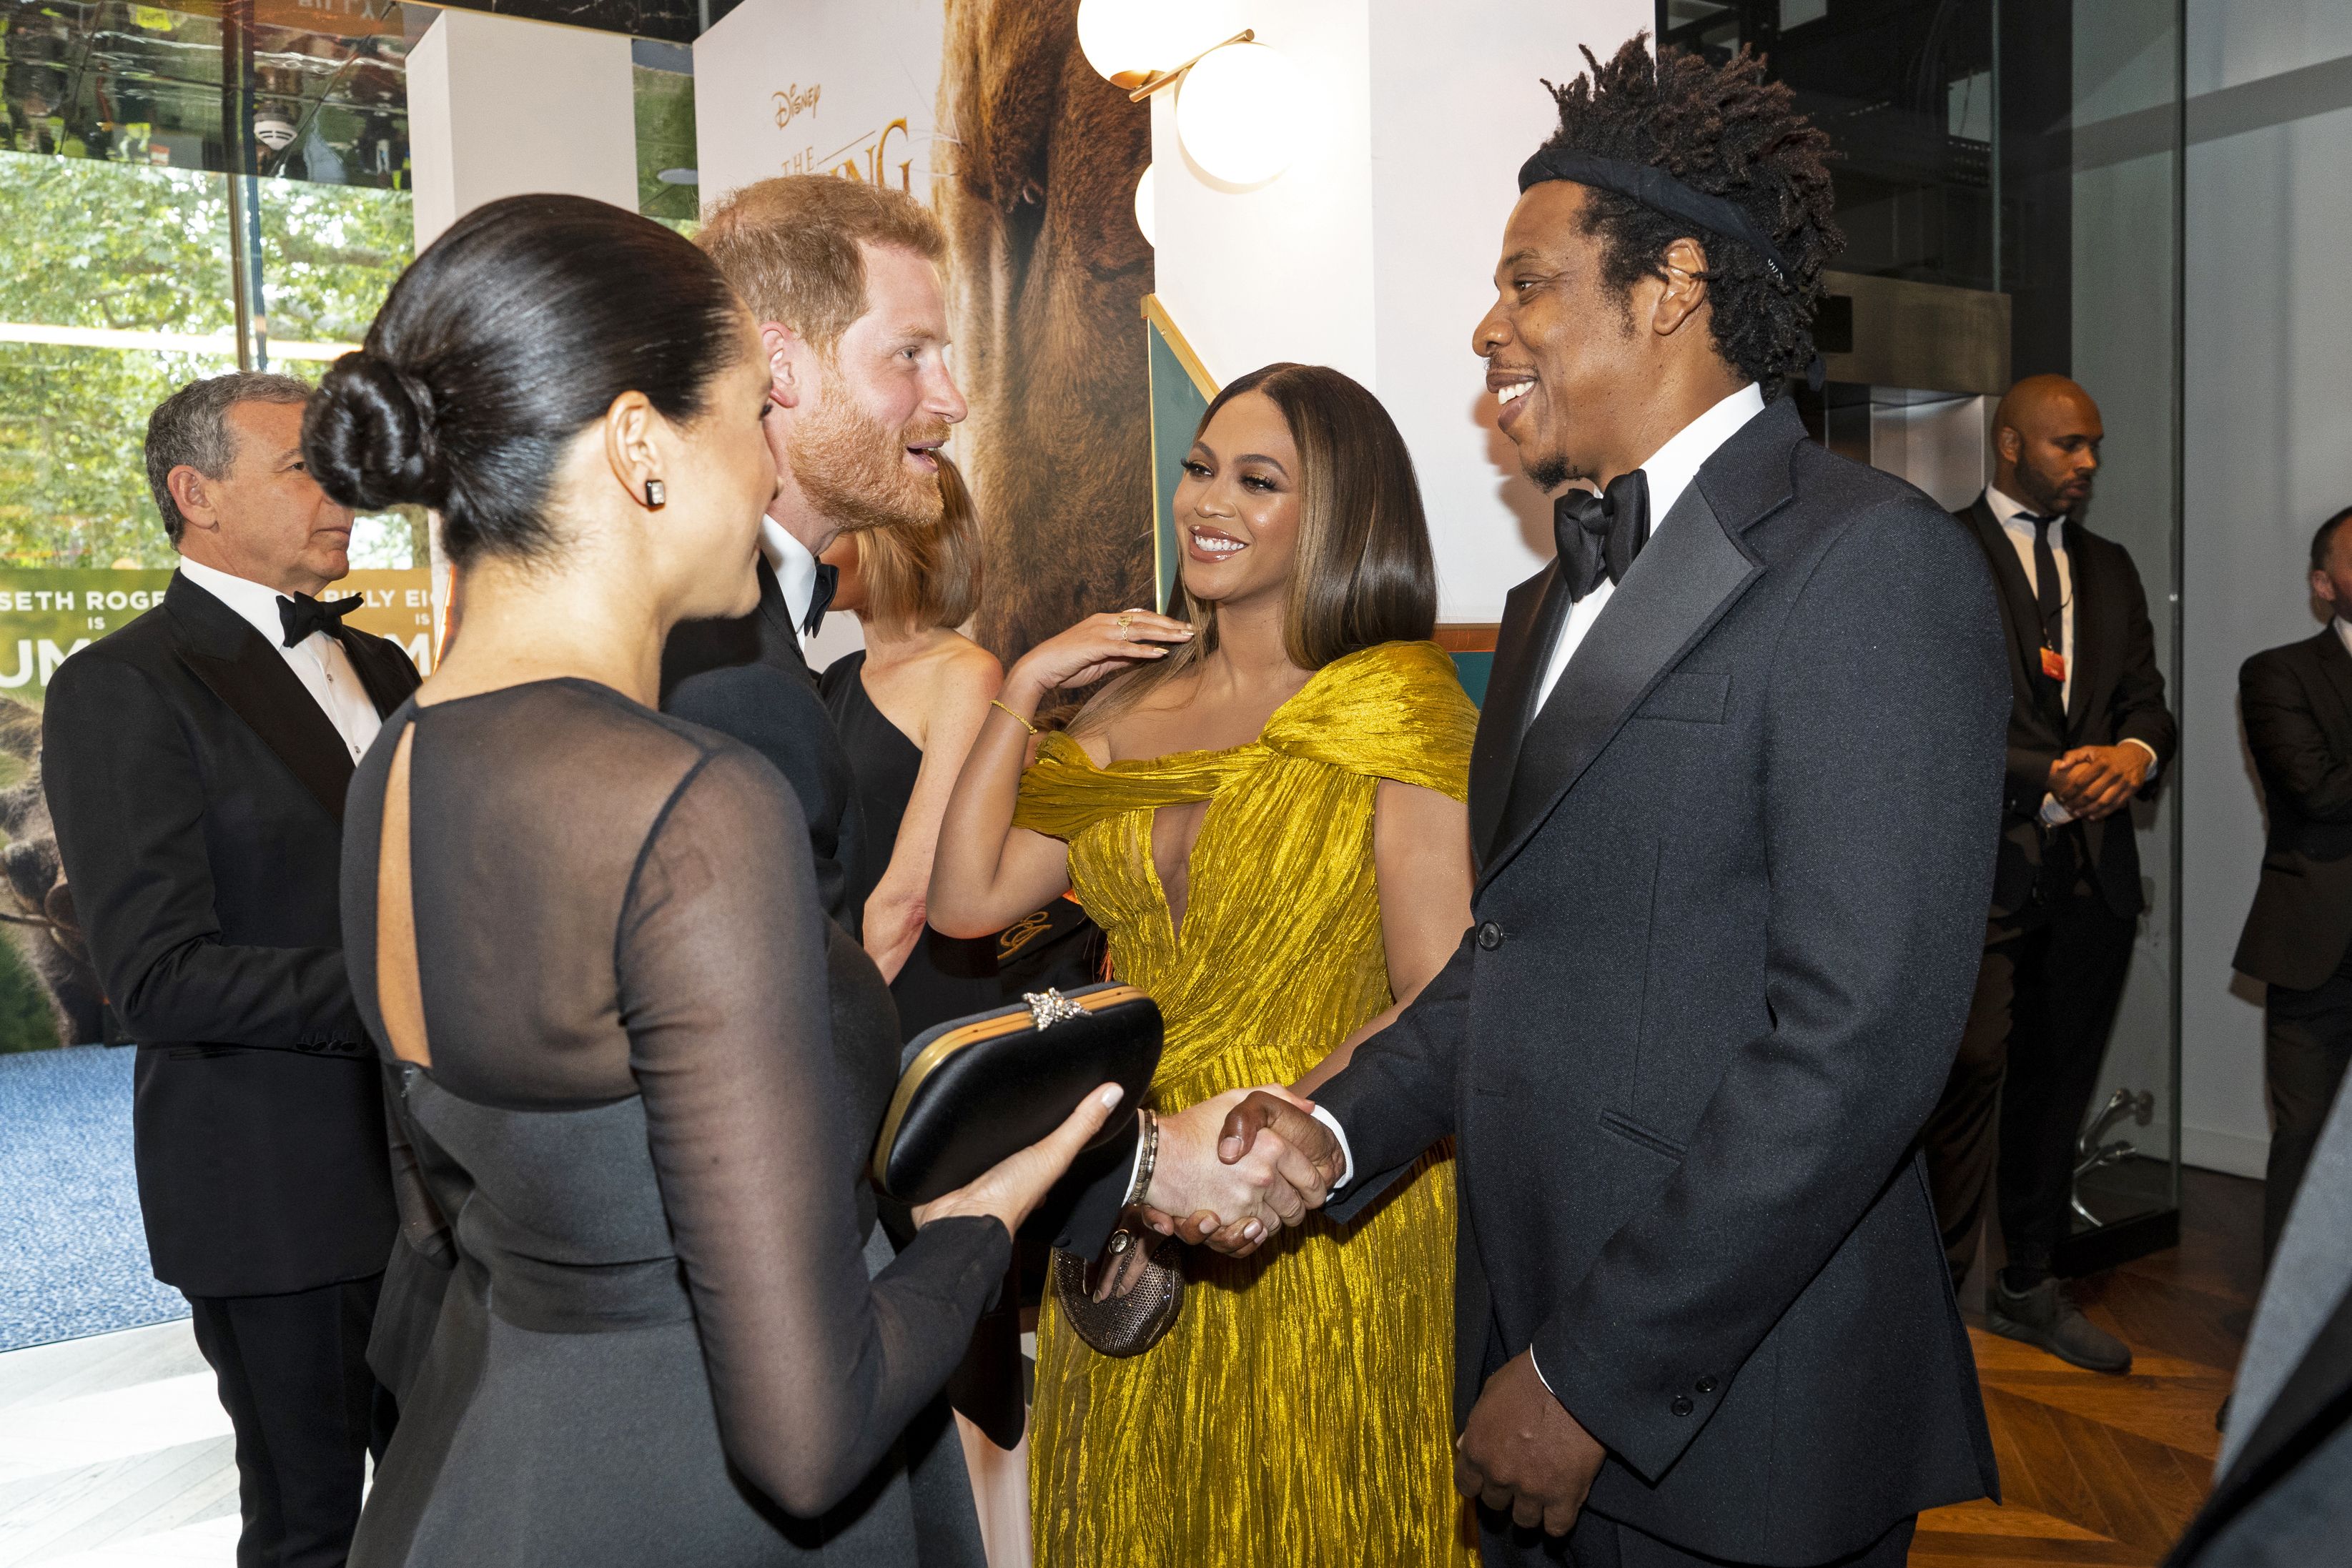 Prince Harry, Meghan Markle, Beyonce, and Jay-Z attend 'The Lion King' premiere.